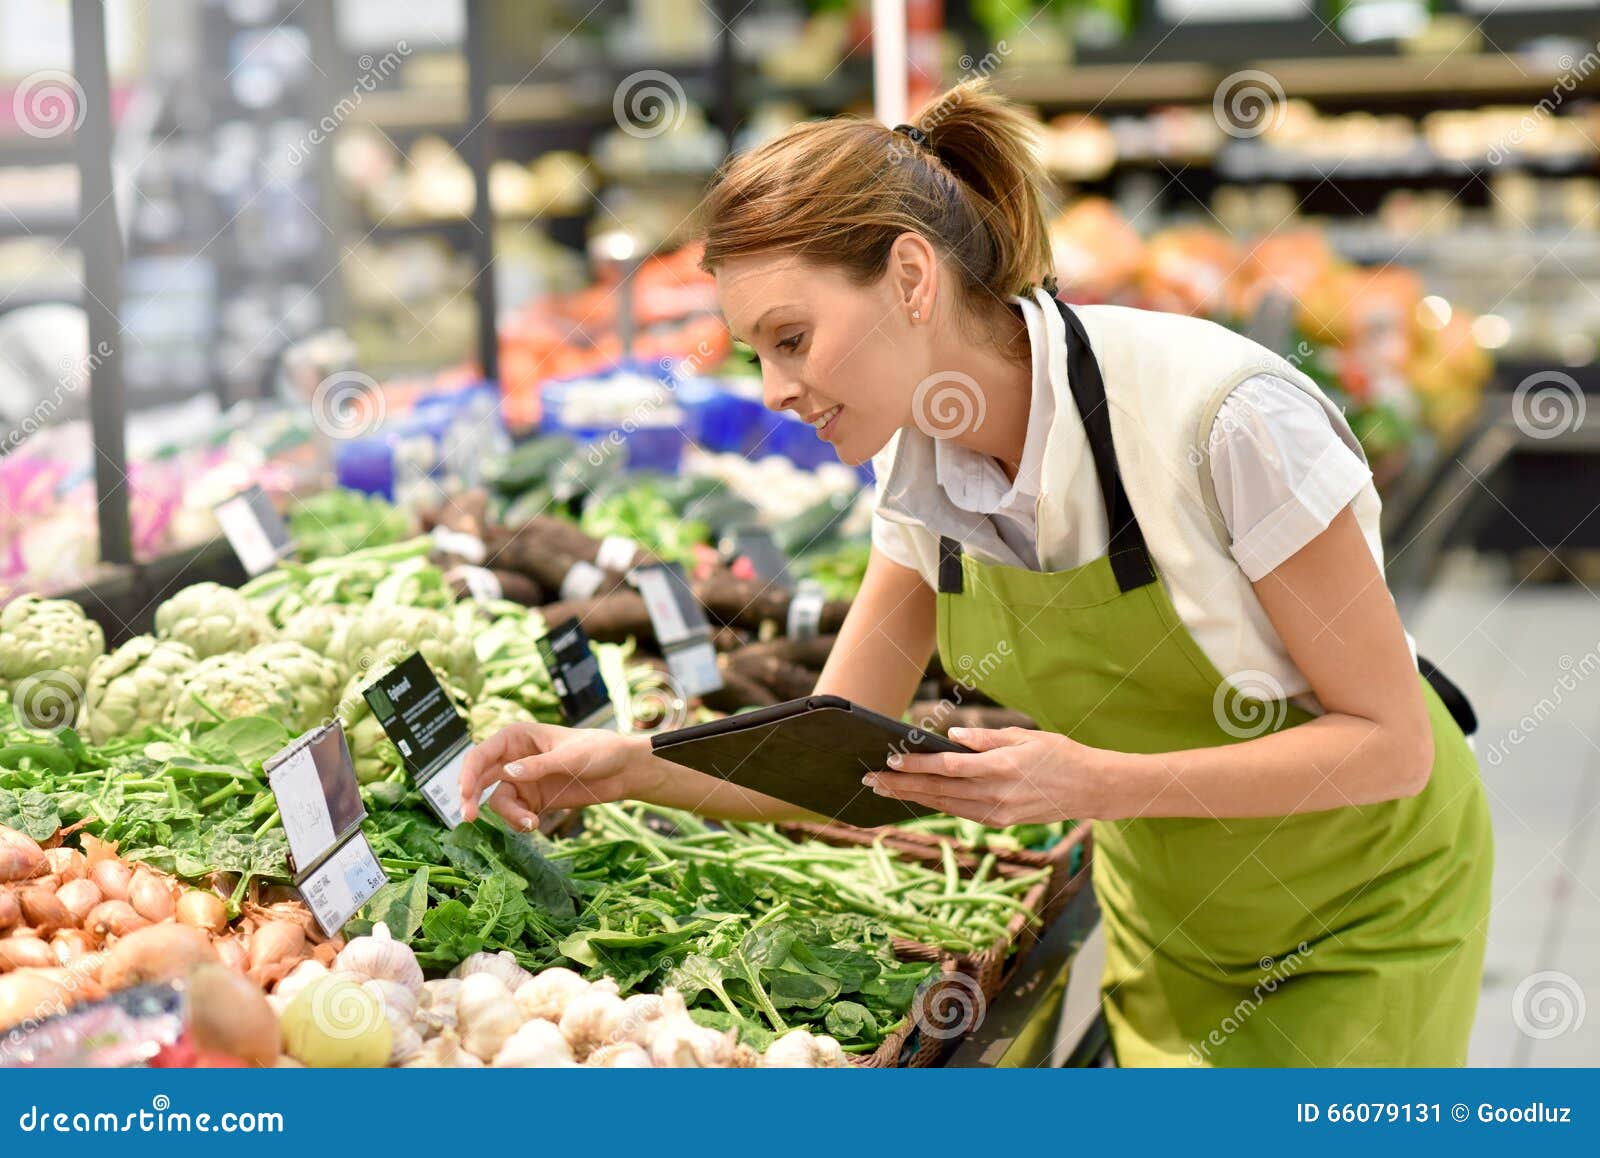 supermarket employee in vegetable section